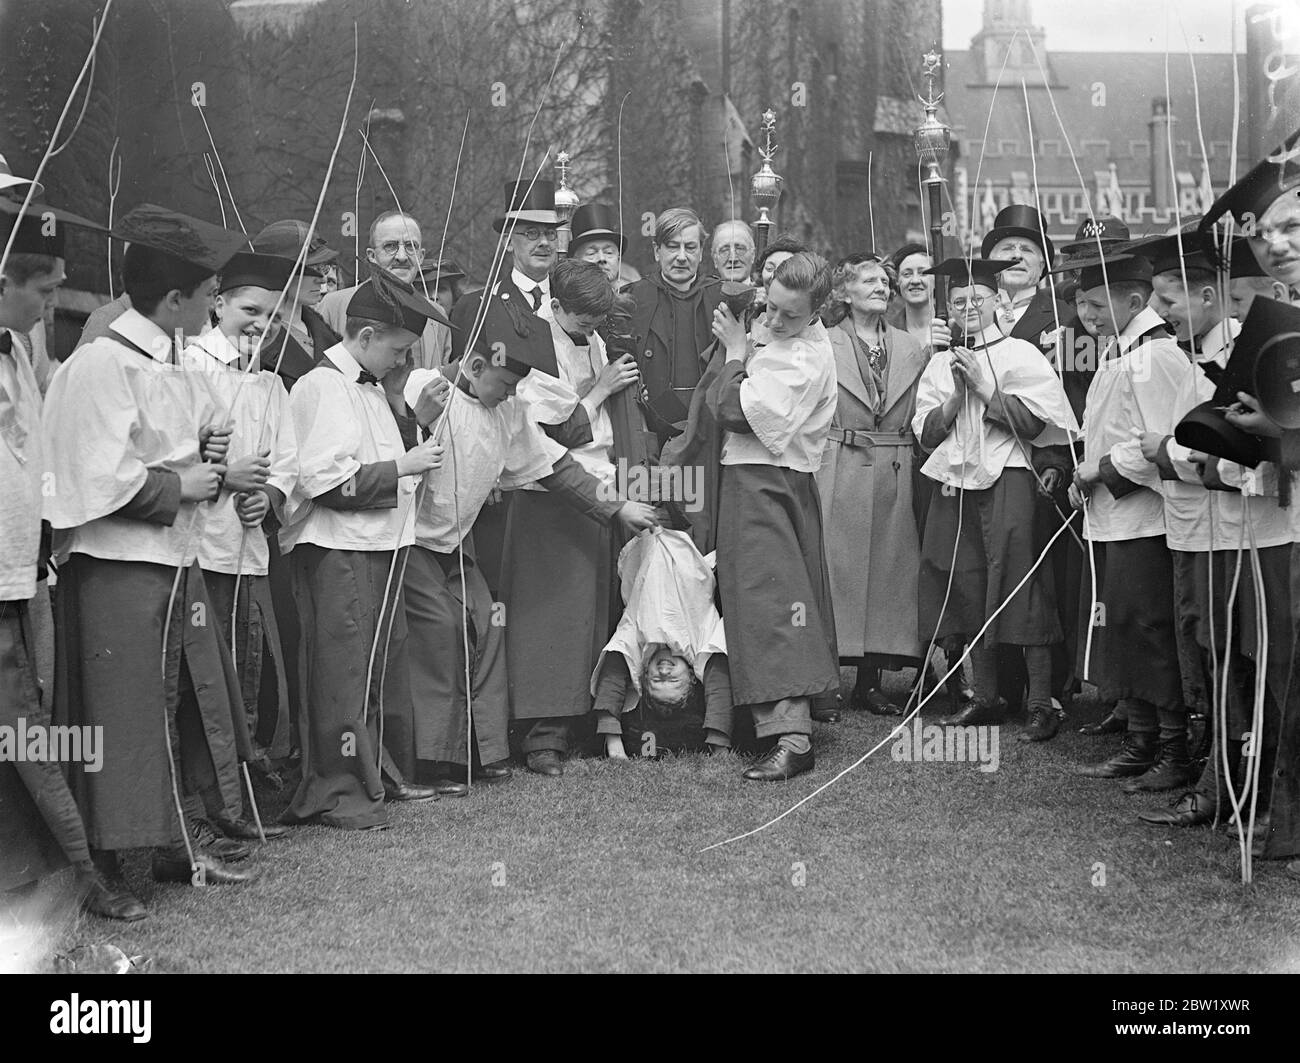 Choirboy sees London for a new angle. Beating Bounds at Temple. Armed with willow wands, choirboys carry out the Rogation tied ceremony of Beating the Bounds of St Clement Danes Church, Strand, London today (Ascension Day). Photo shows, choirboy sees London from an unusual angle during the ceremony in the temple. 6 May 1937 Stock Photo